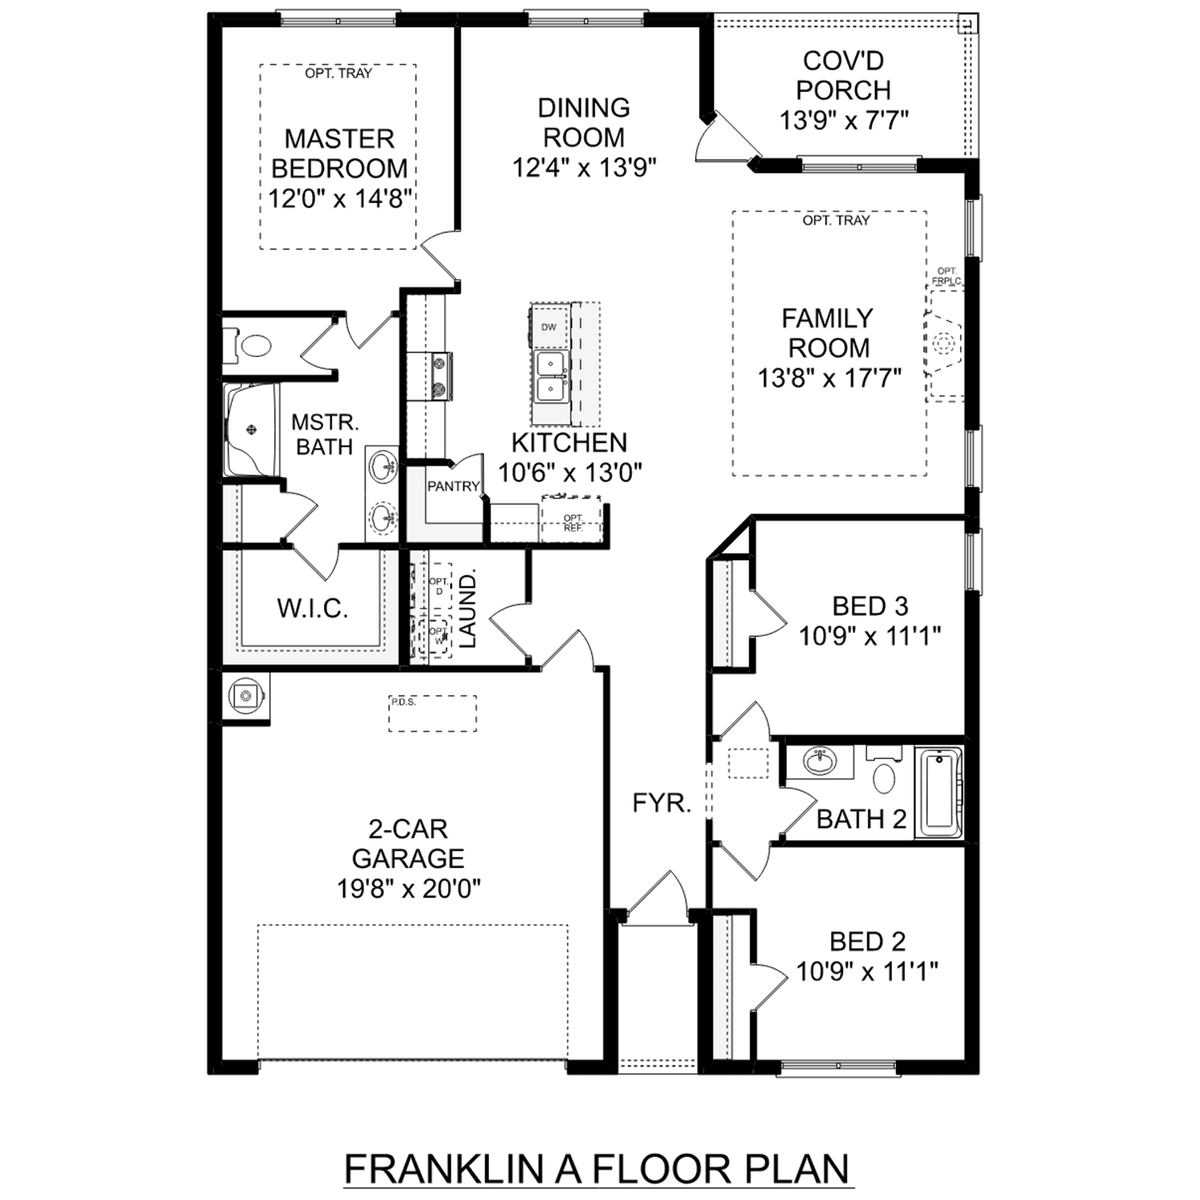 1 - The Franklin floor plan layout for 2612 Ajs Arbor Drive in Davidson Homes' Blue Spring community.